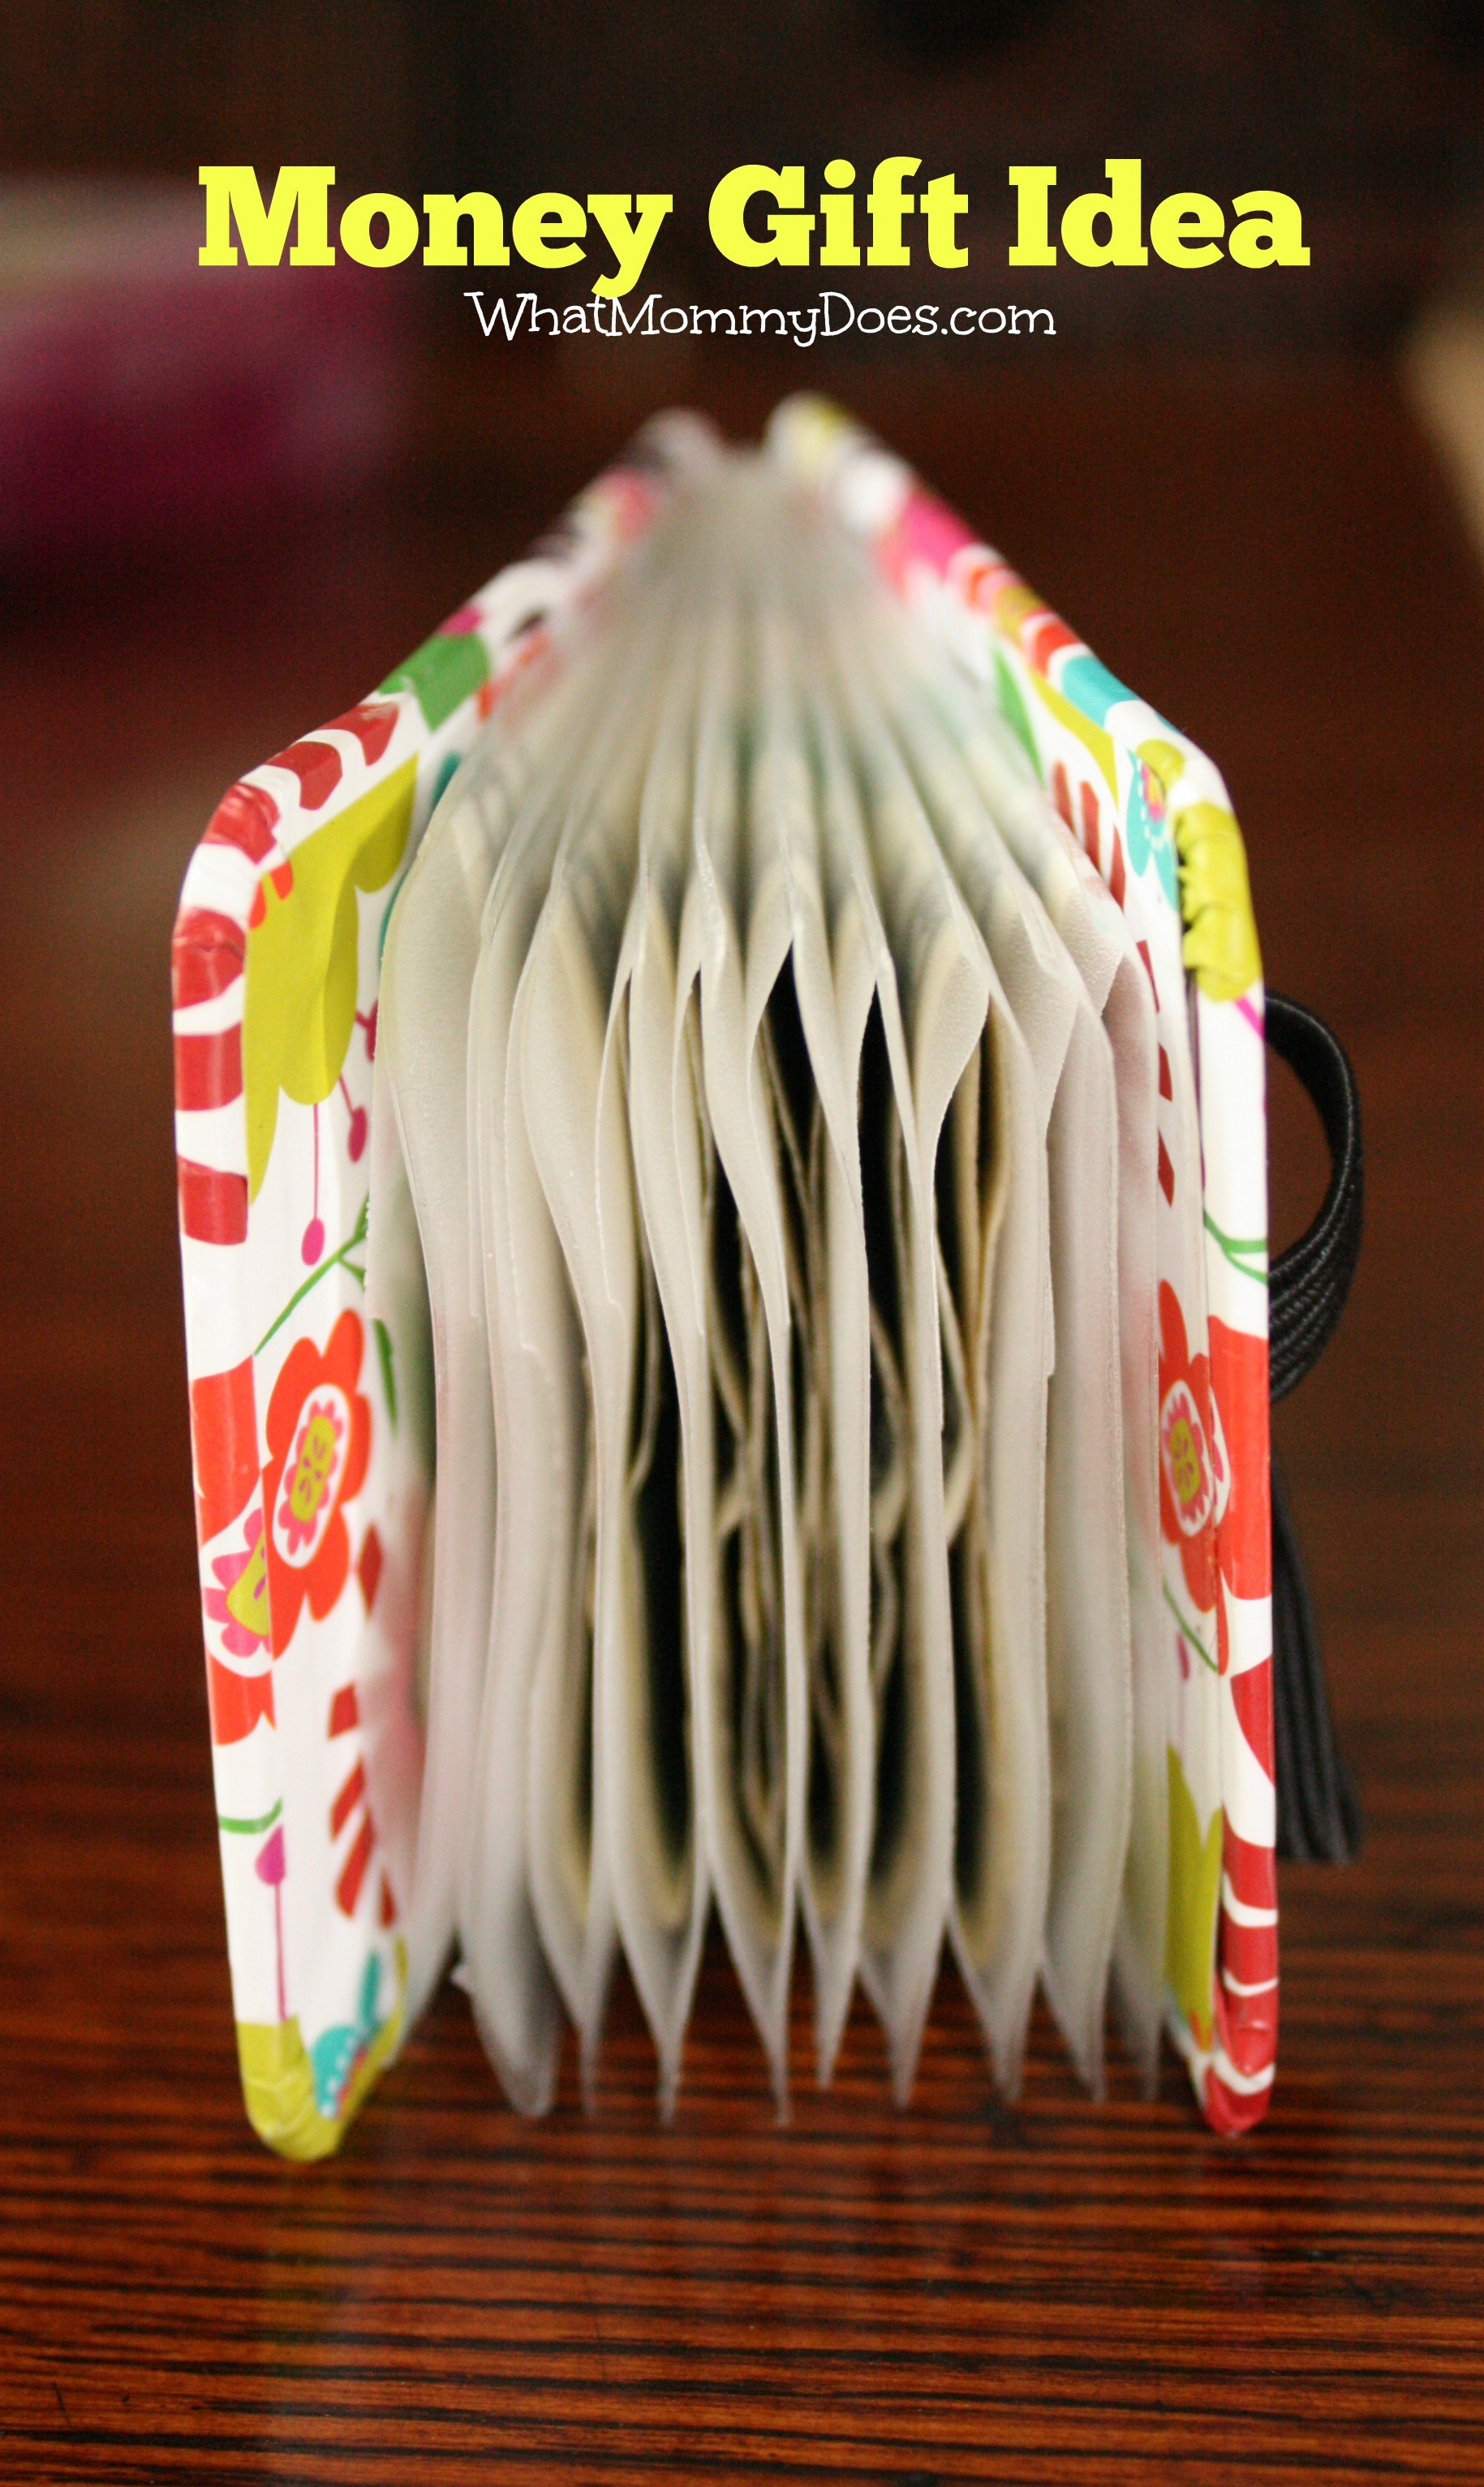 Money Gift Ideas For Birthdays
 7 Creative Money Gift Ideas What Mommy Does